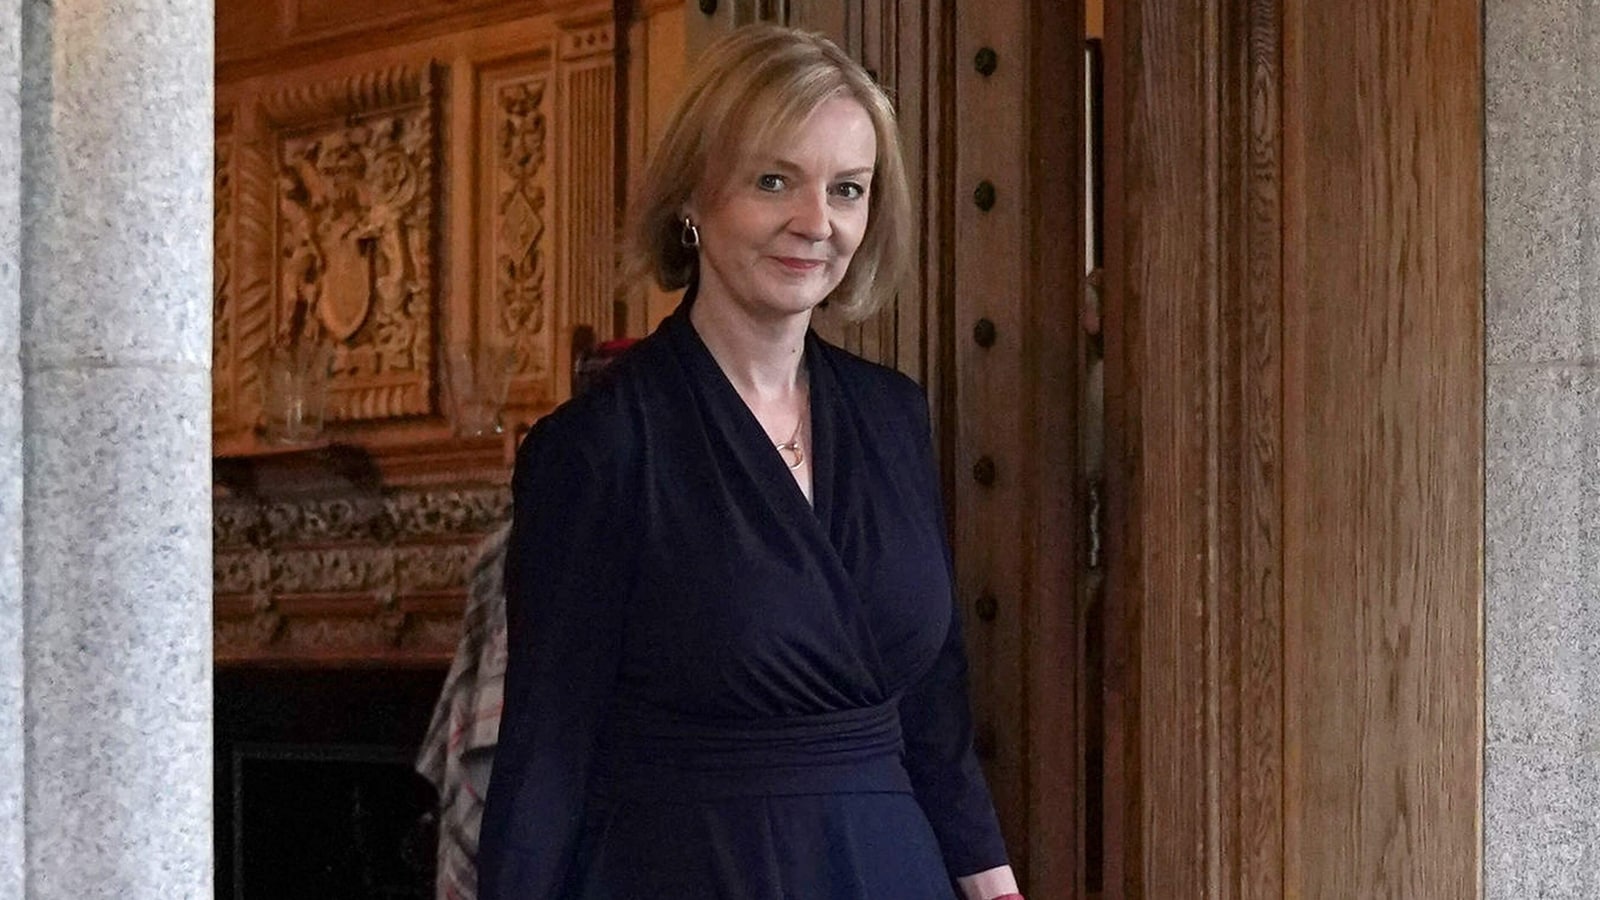 Liz Truss will…”: British High Commissioner says this on India-UK ties | Latest News India - Hindustan Times